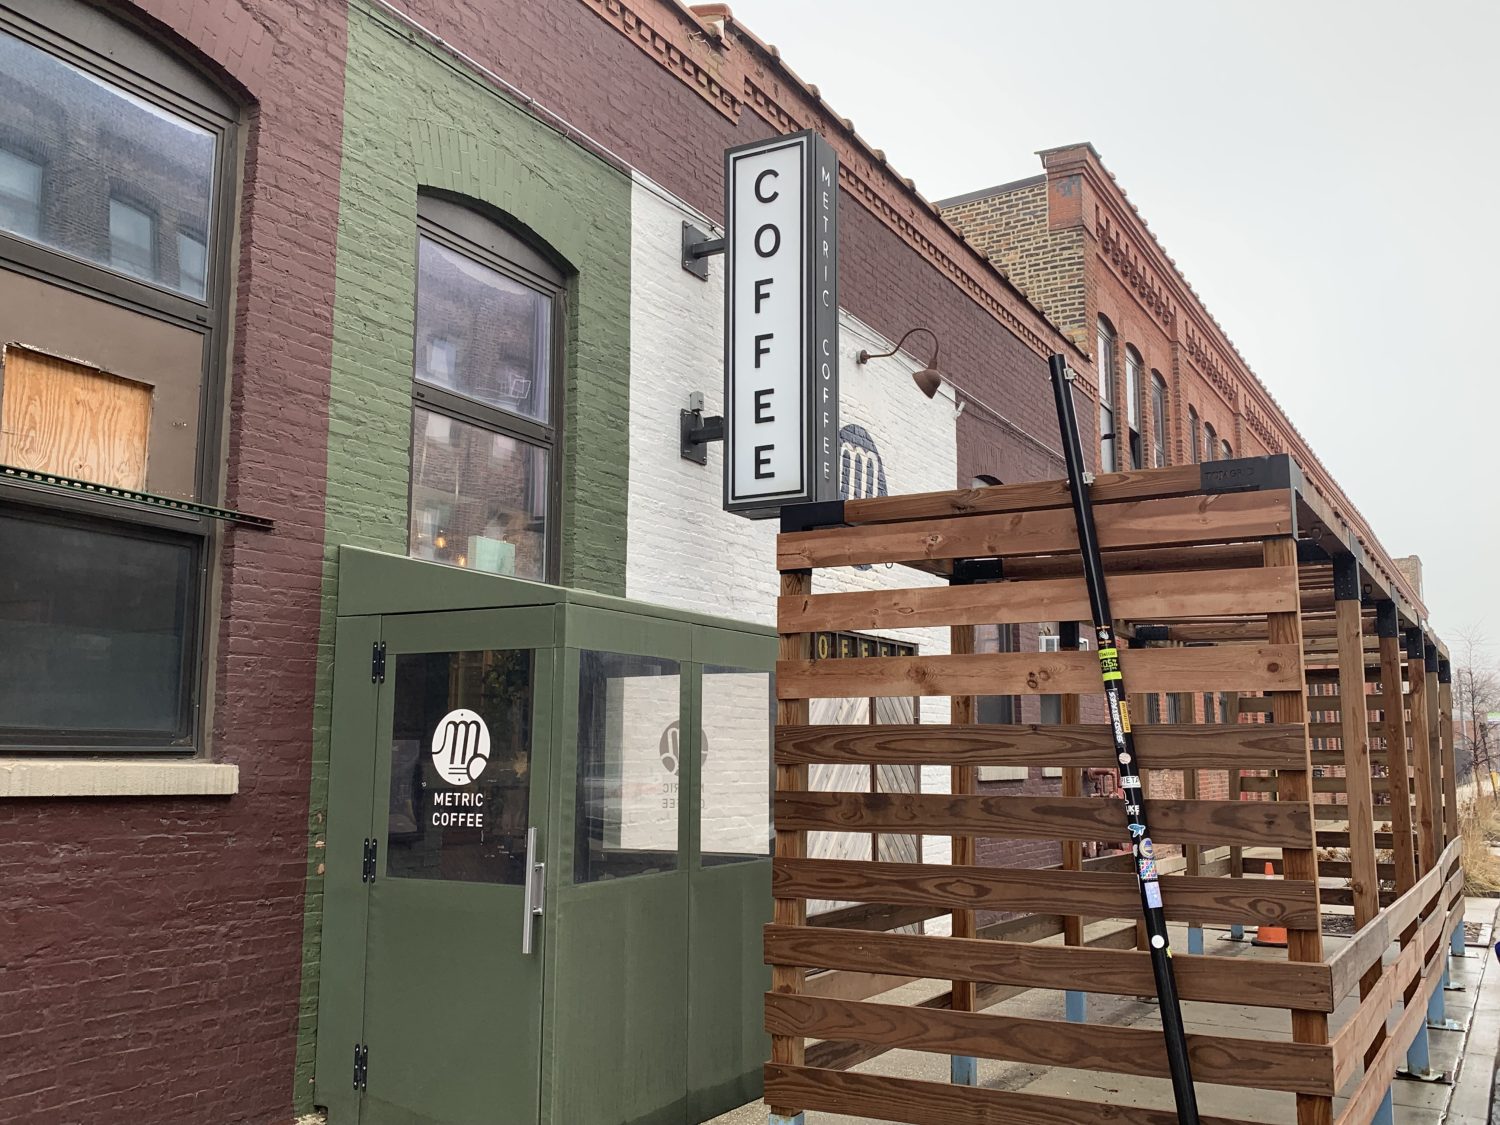 brick building green paint on wall, coffee sign mounted on wall, wooden crate 